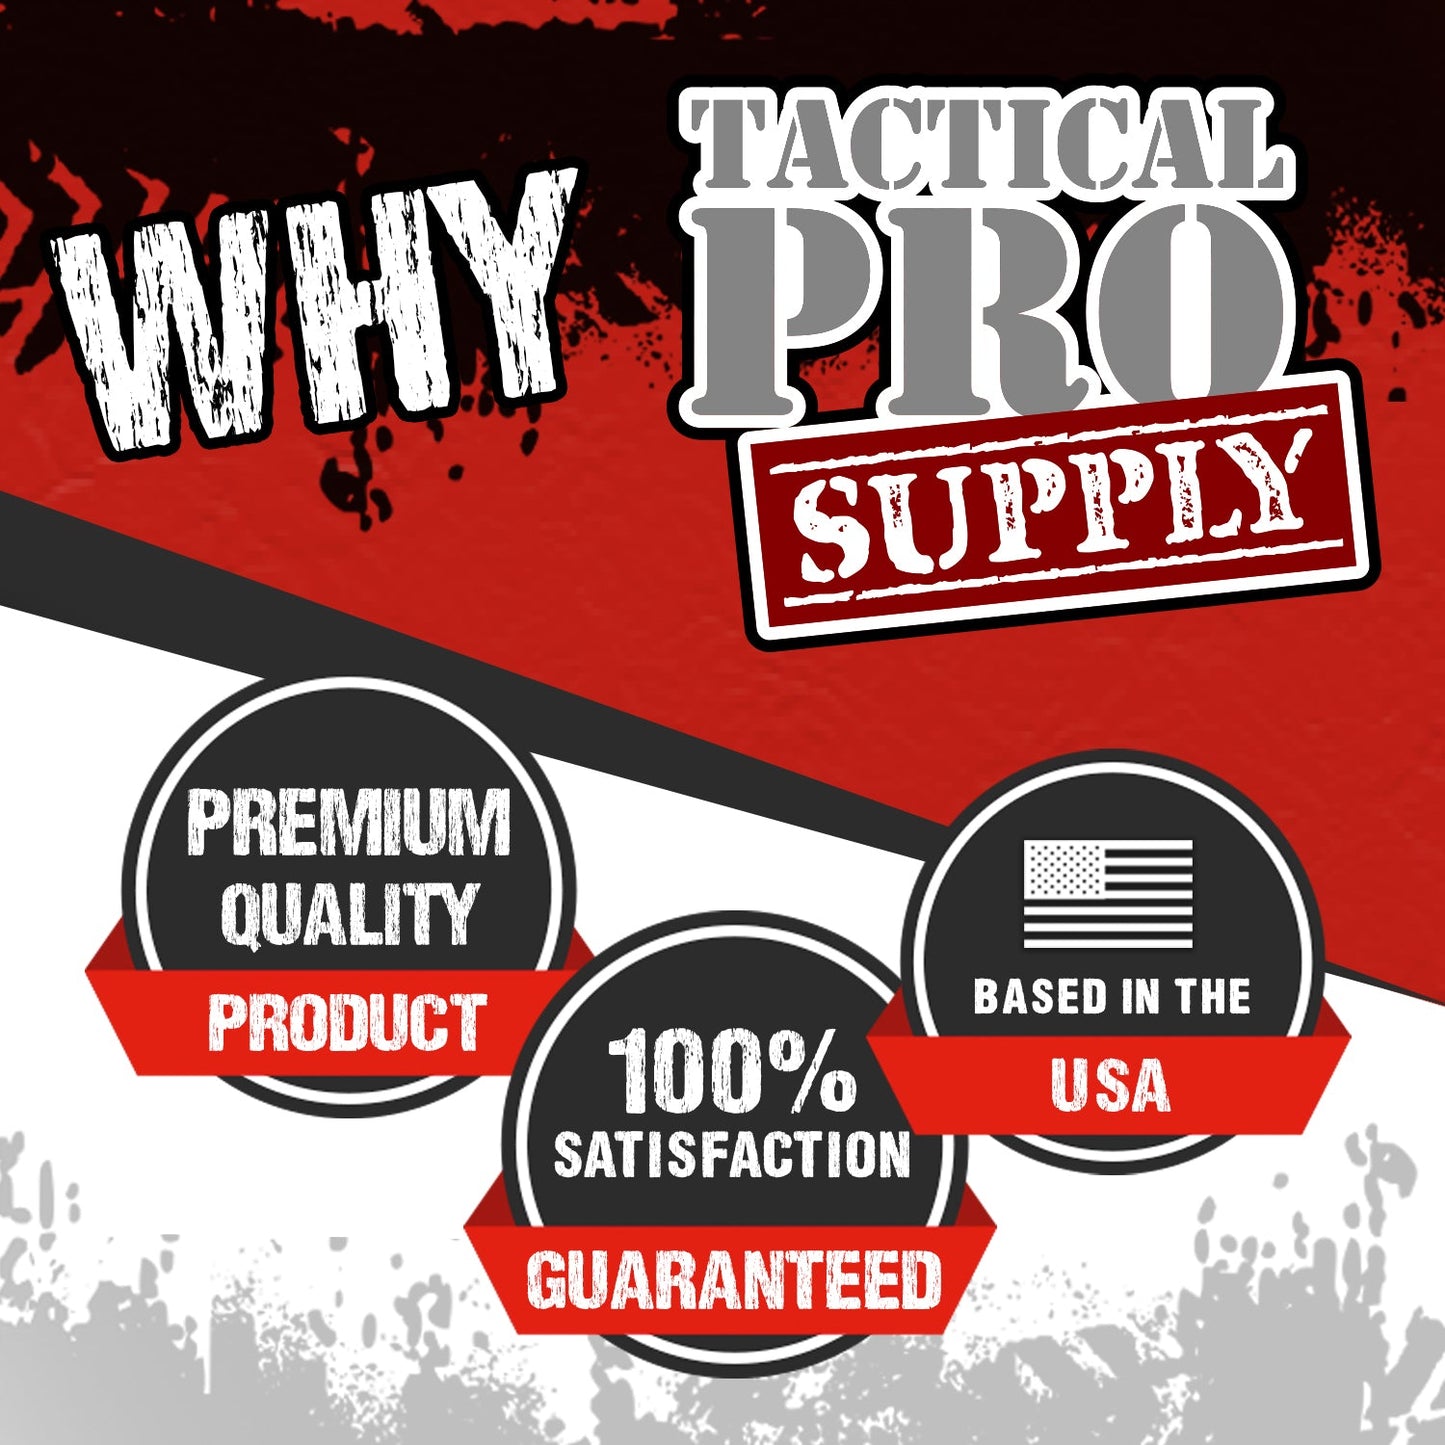 Rigged - Tactical Pro Supply, LLC